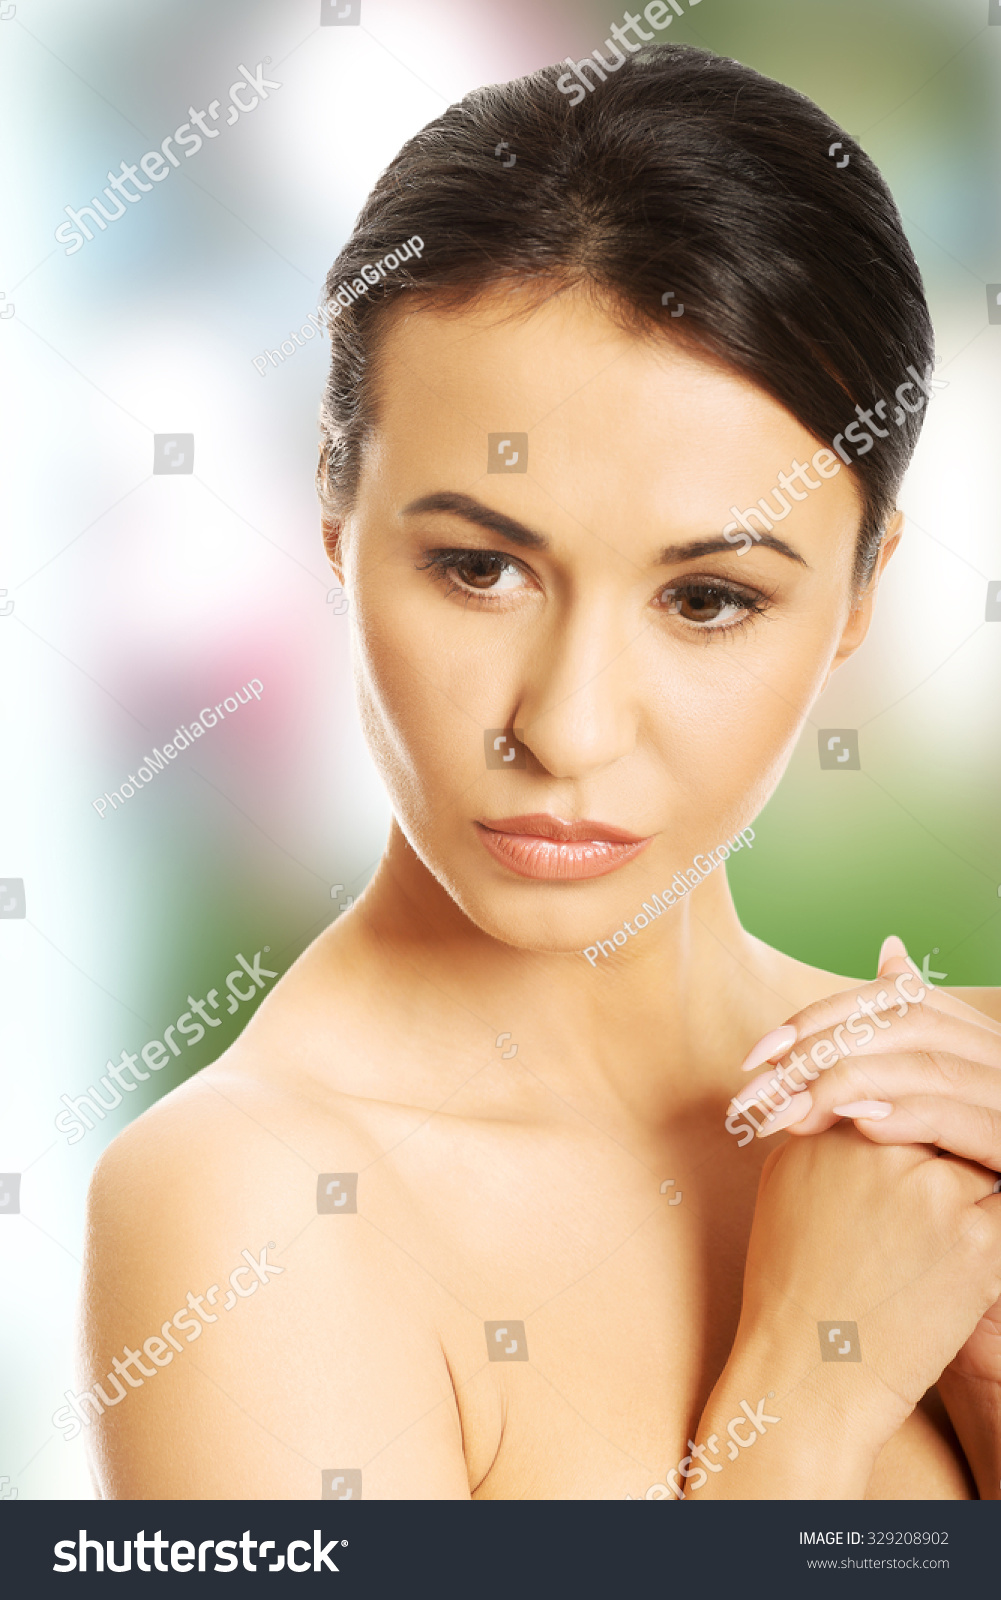 Close Nude Woman Covering Her Breast Stock Photo Shutterstock